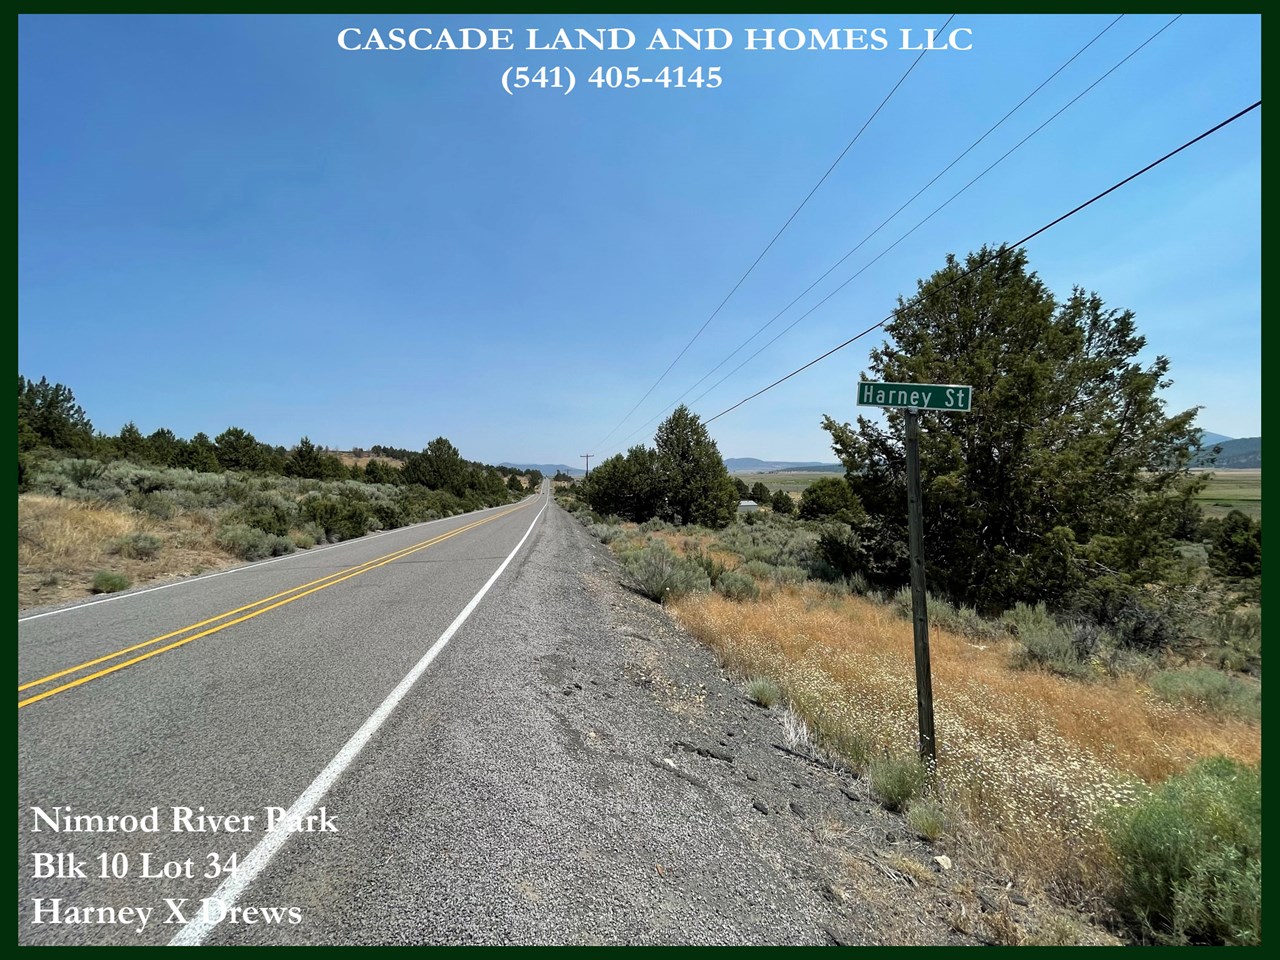 the paved road allows for easy access to the property! there is also a dirt road that passes along one side of the property.